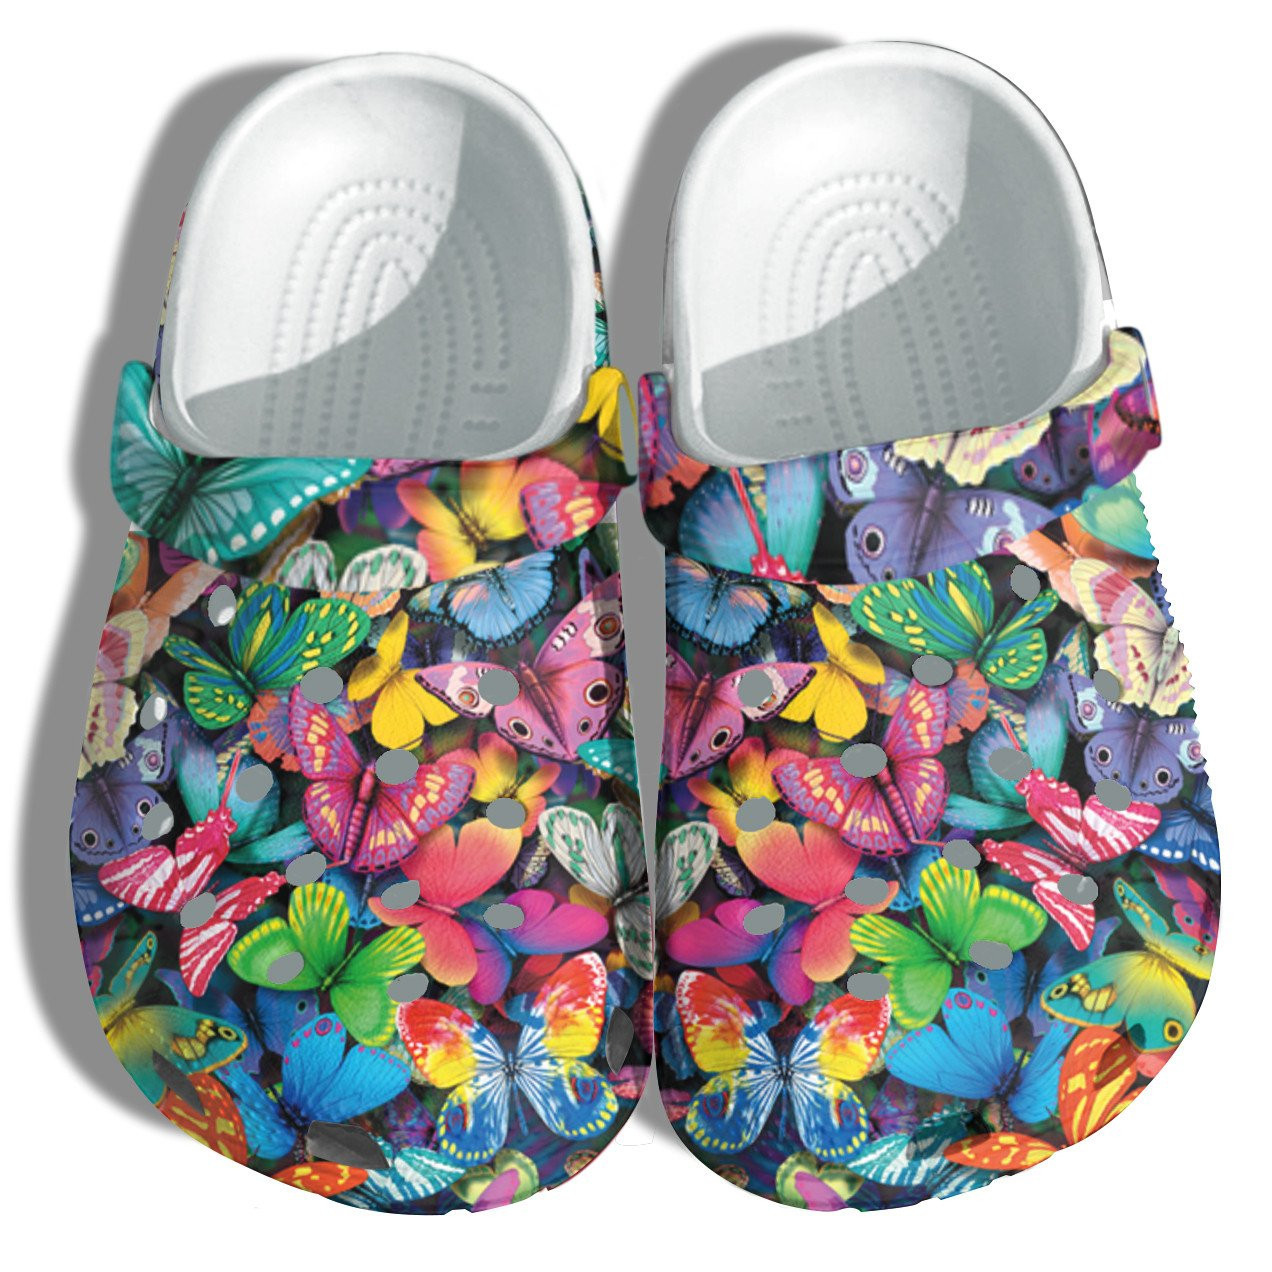 Autism Butterfly Colorful Crocs Shoes - Magical Butterfly Girl Lover Crocs Shoes Croc Clogs Gifts For Women Daughter